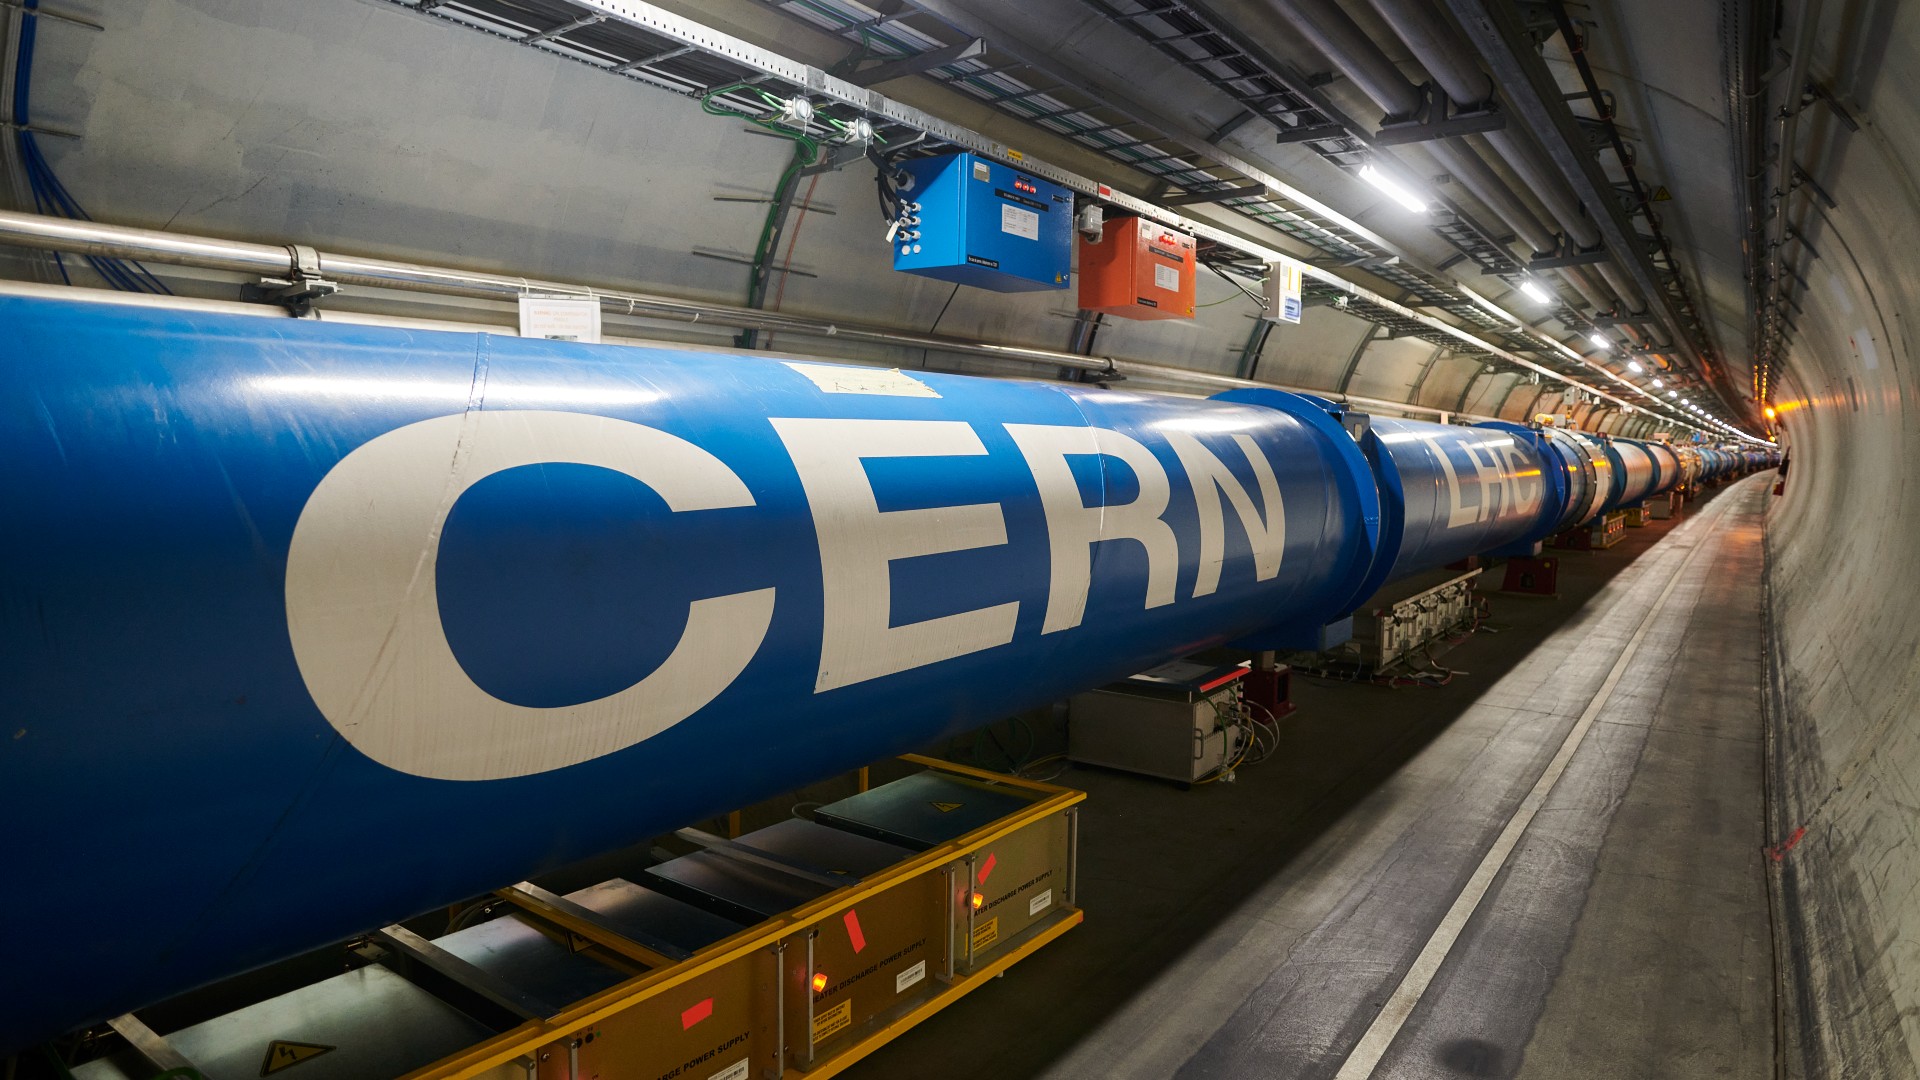 How CERN expands the frontiers of knowledge UNLEASH World